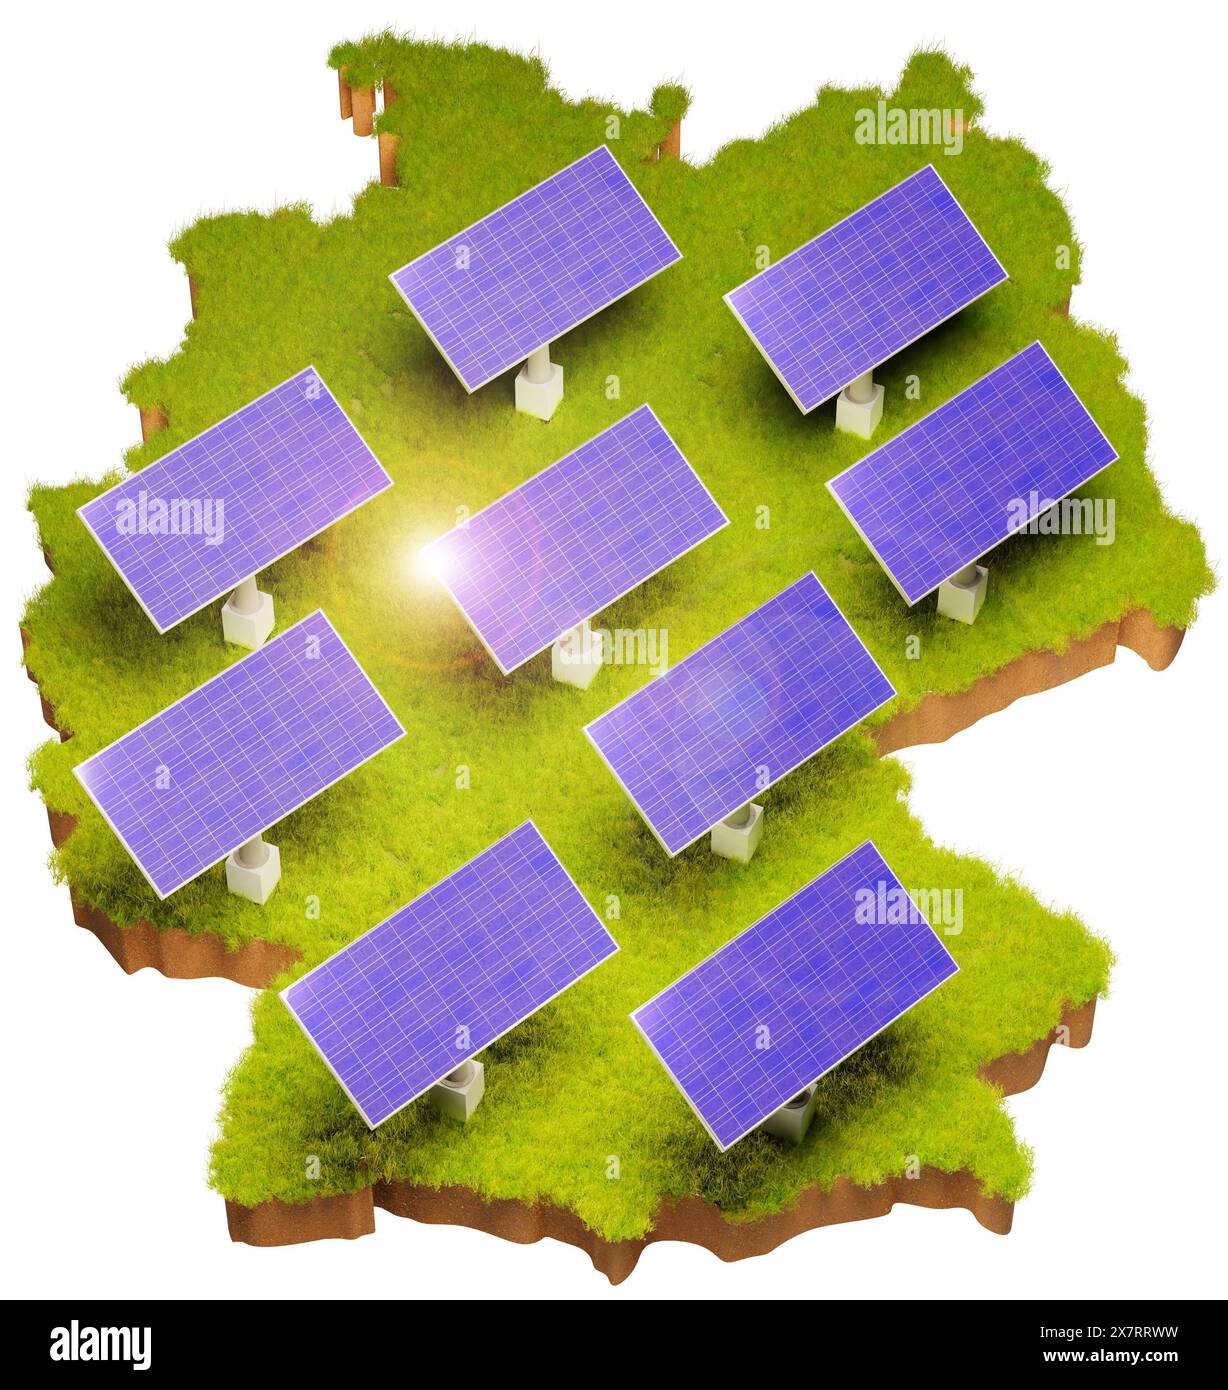 Renewable Energy with solar panels in Germany concept. Grass area with soil below in the form of Germany with added solar panels. Lens flare. White ba Stock Photo